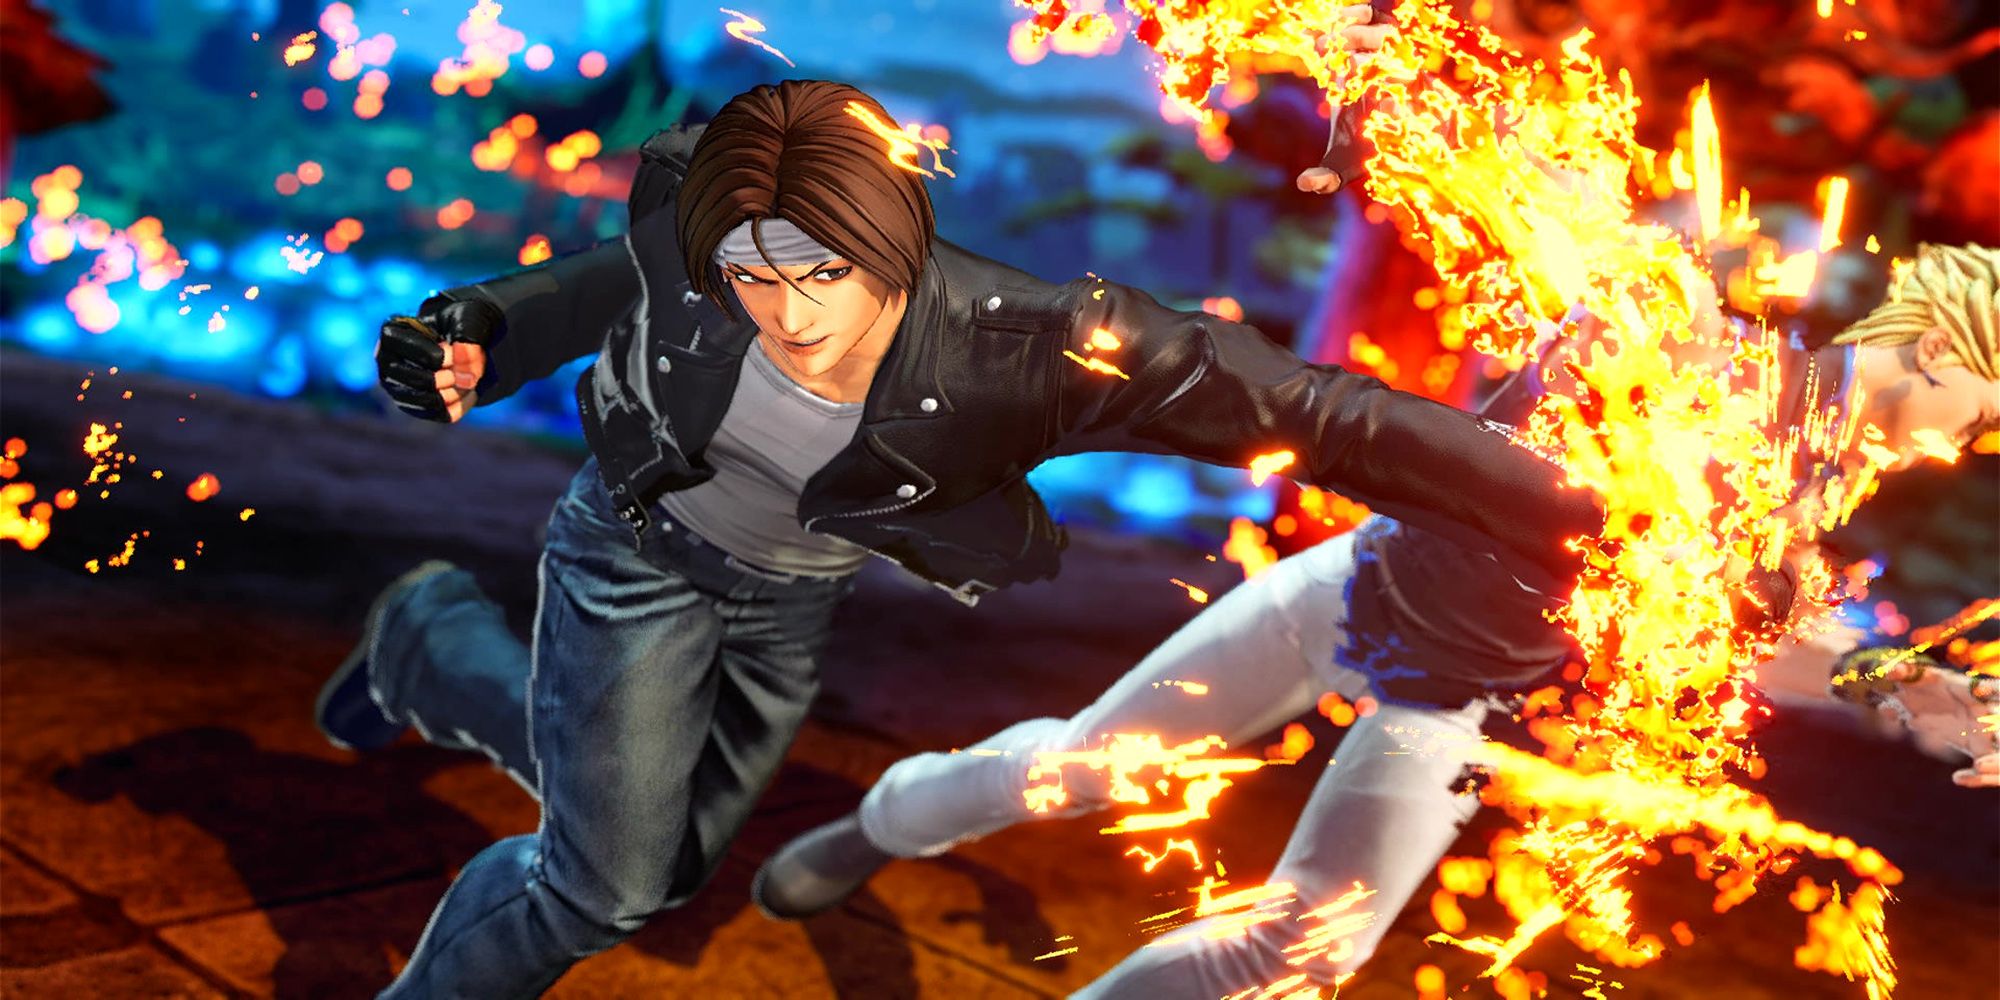 During his Climax Super Special Move, Kyo Kusanagi sends a fiery punch towards Benimaru Nikaido at The Chinese Garden. The King Of Fighters 15.